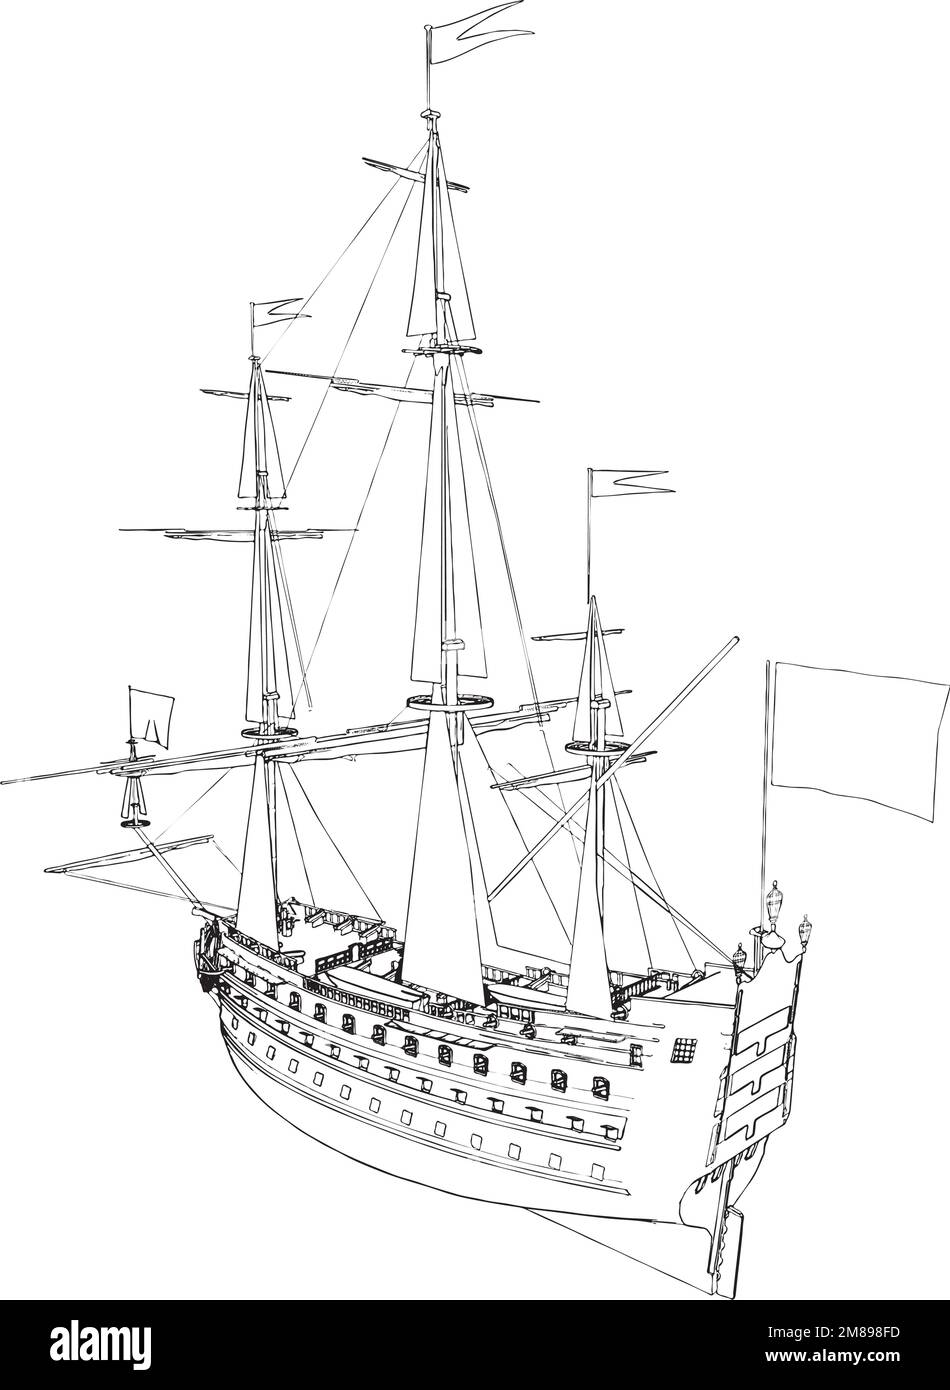 Historic ship drawing Black and White Stock Photos & Images - Alamy